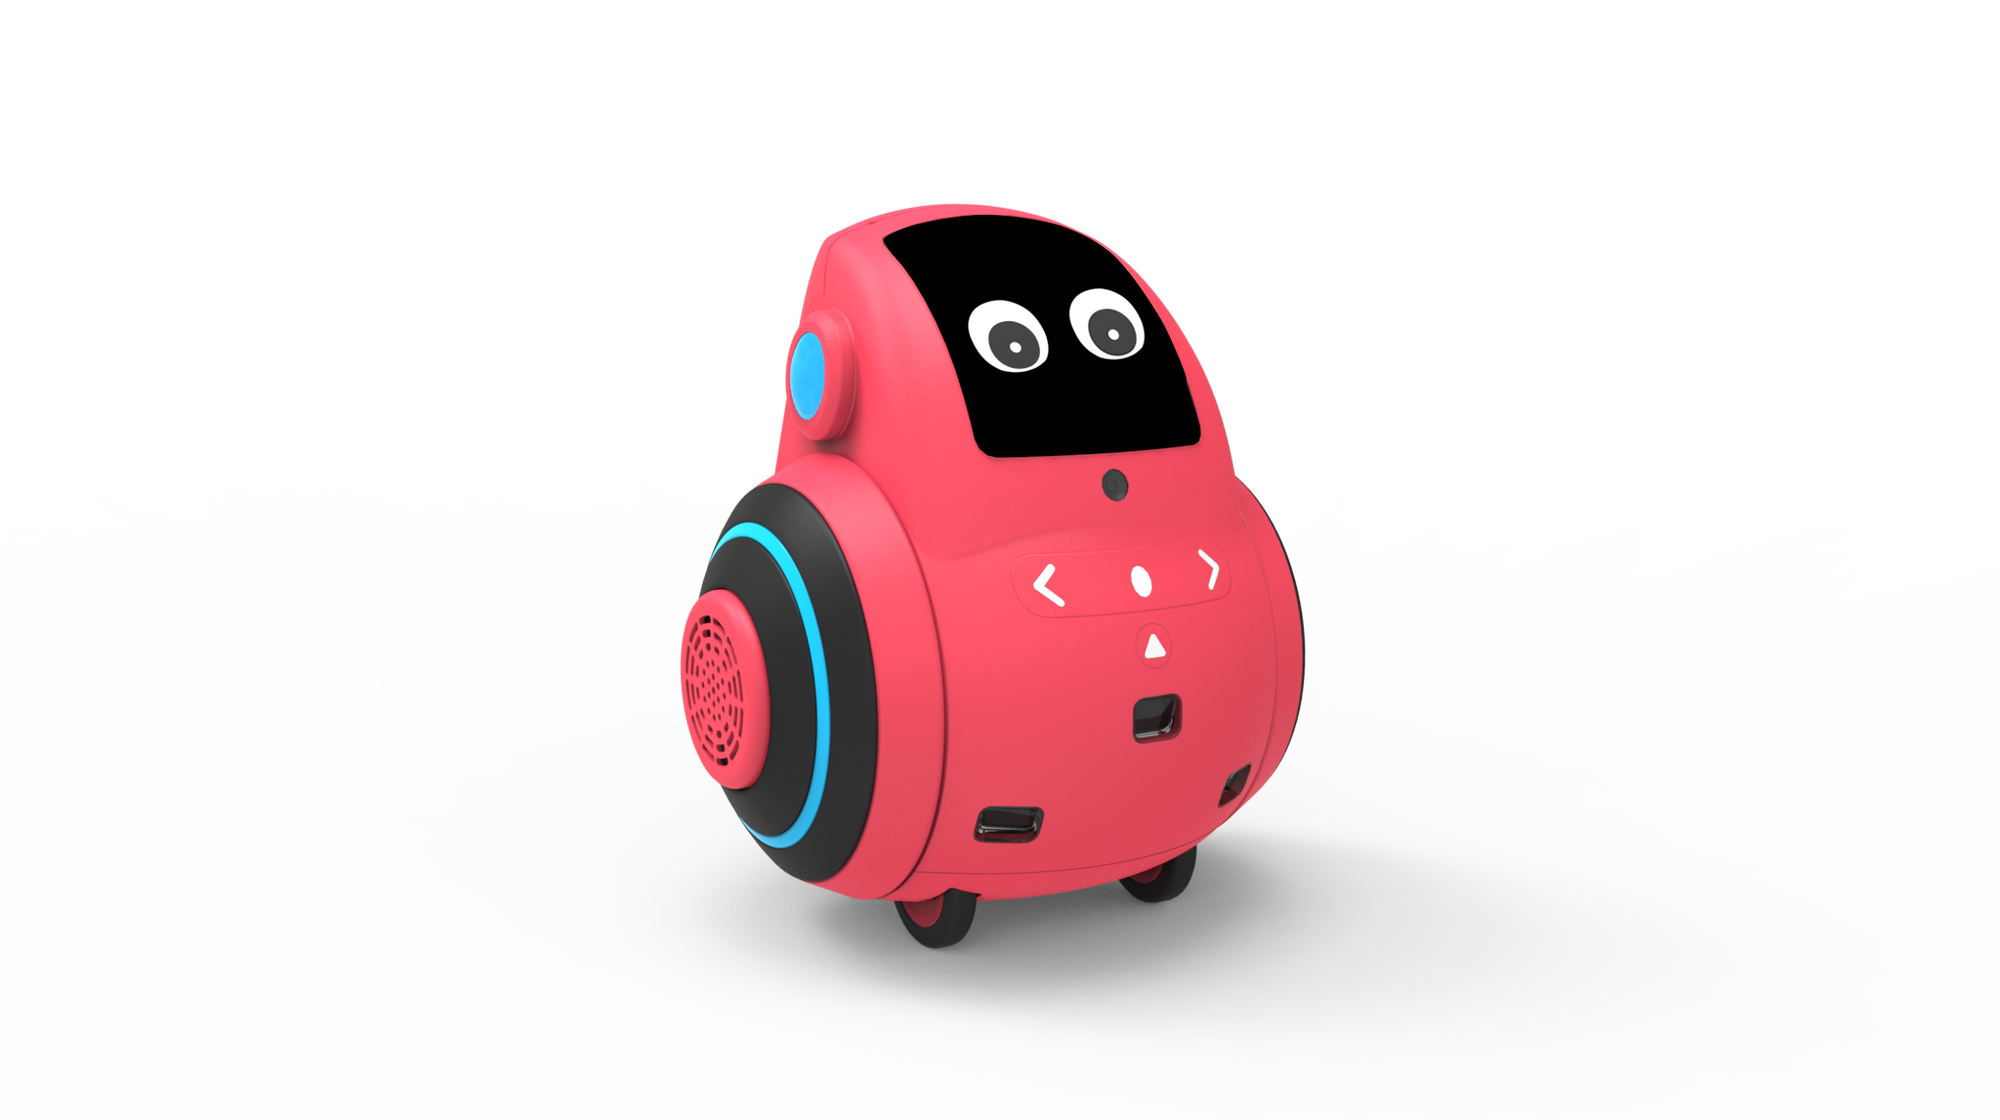 Miko 2 is an Adorable Robot That'll Babysit & Teach Your Kids at Home